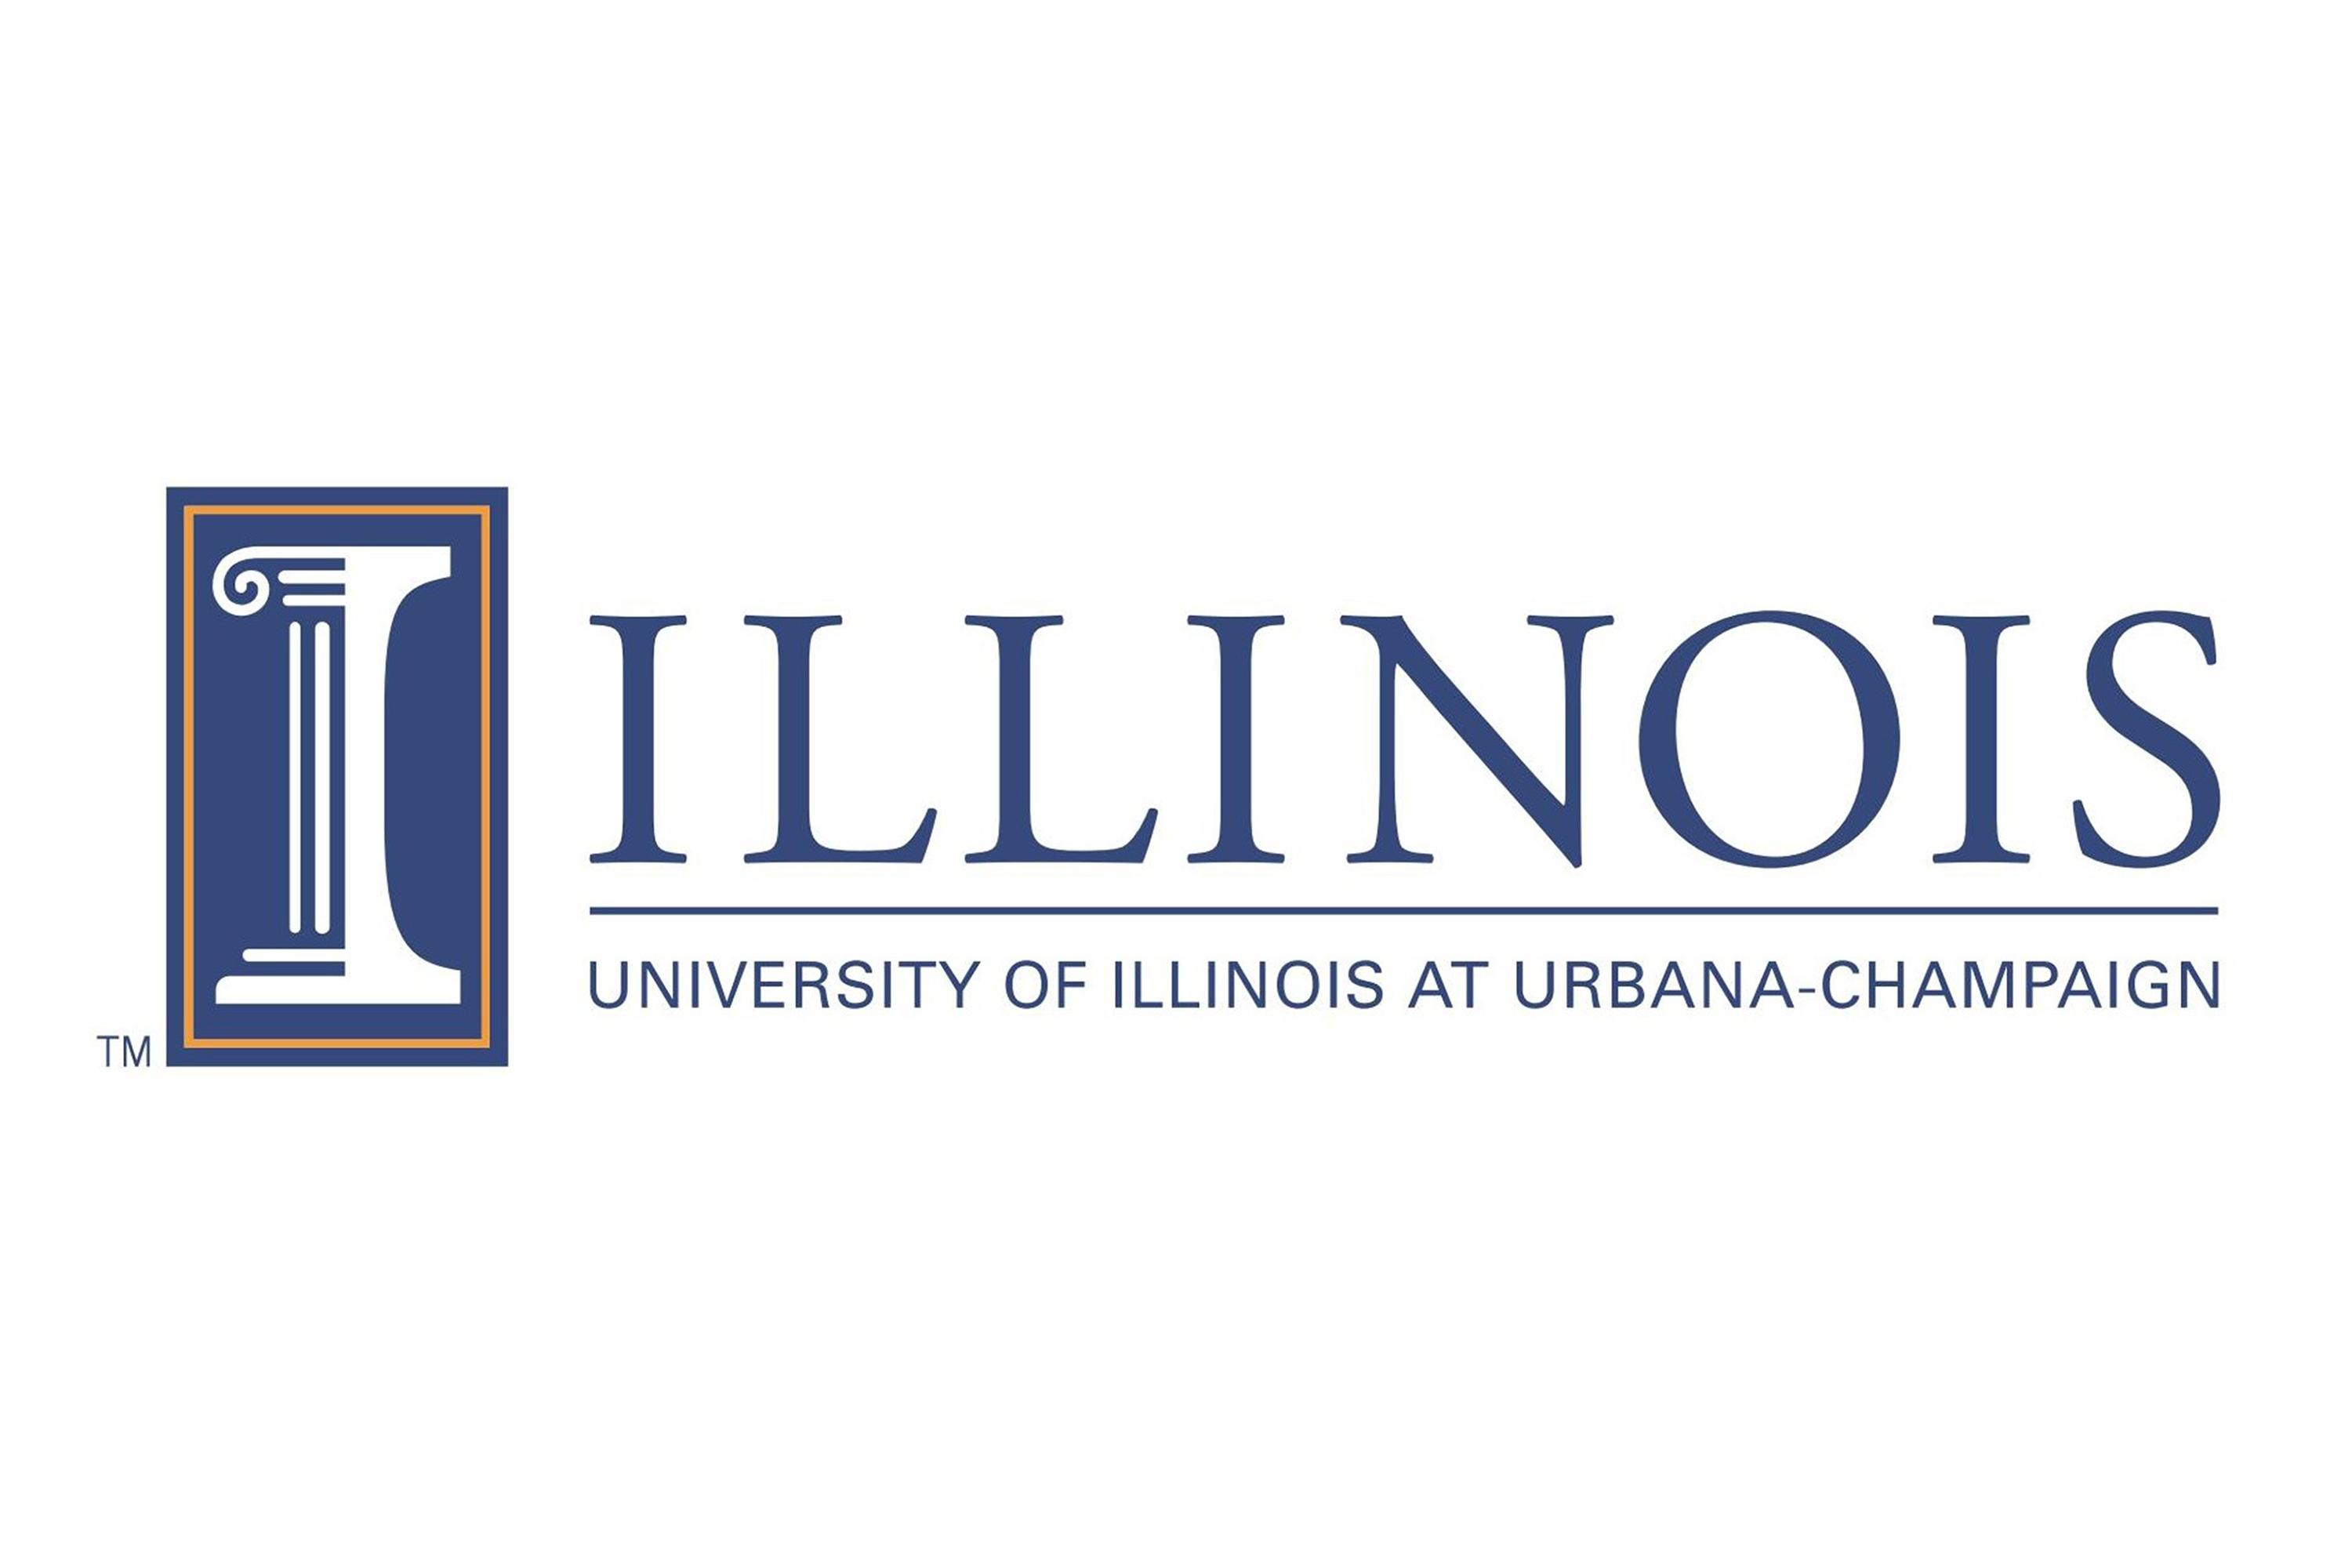 University of Illinois Logo - University of Illinois offers free tuition for in-state income ...